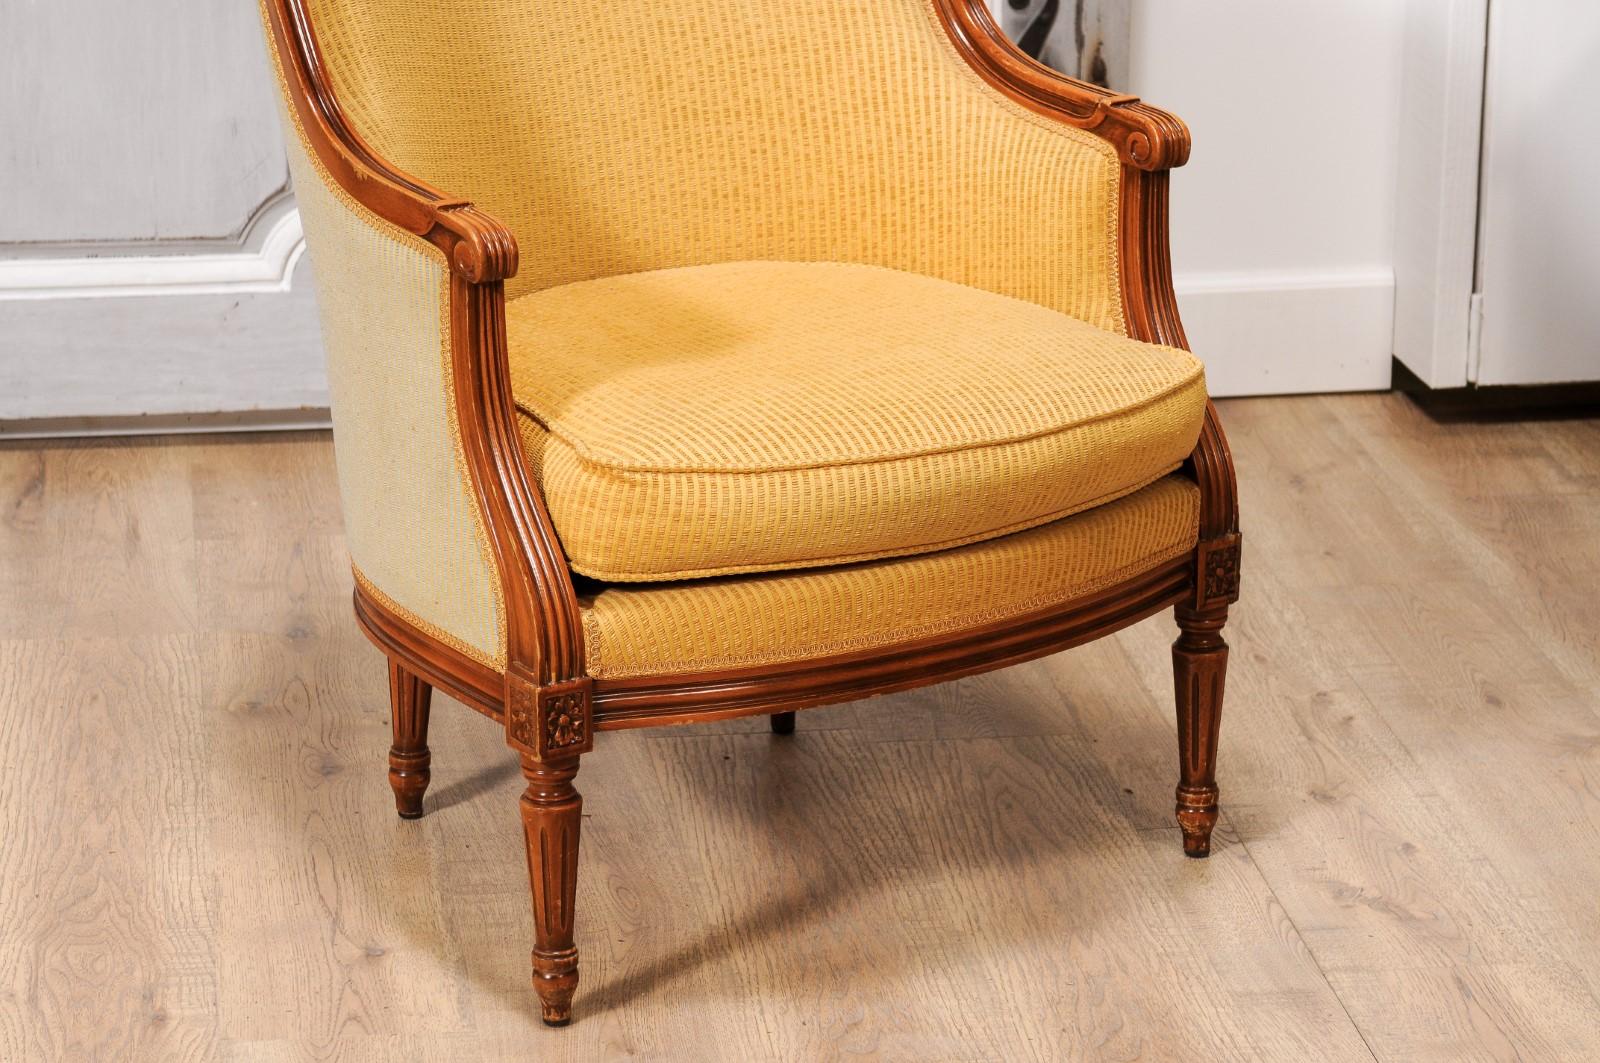 Carved French Louis XVI Style Walnut Bergères Chairs with Wraparound Backs, Pair For Sale